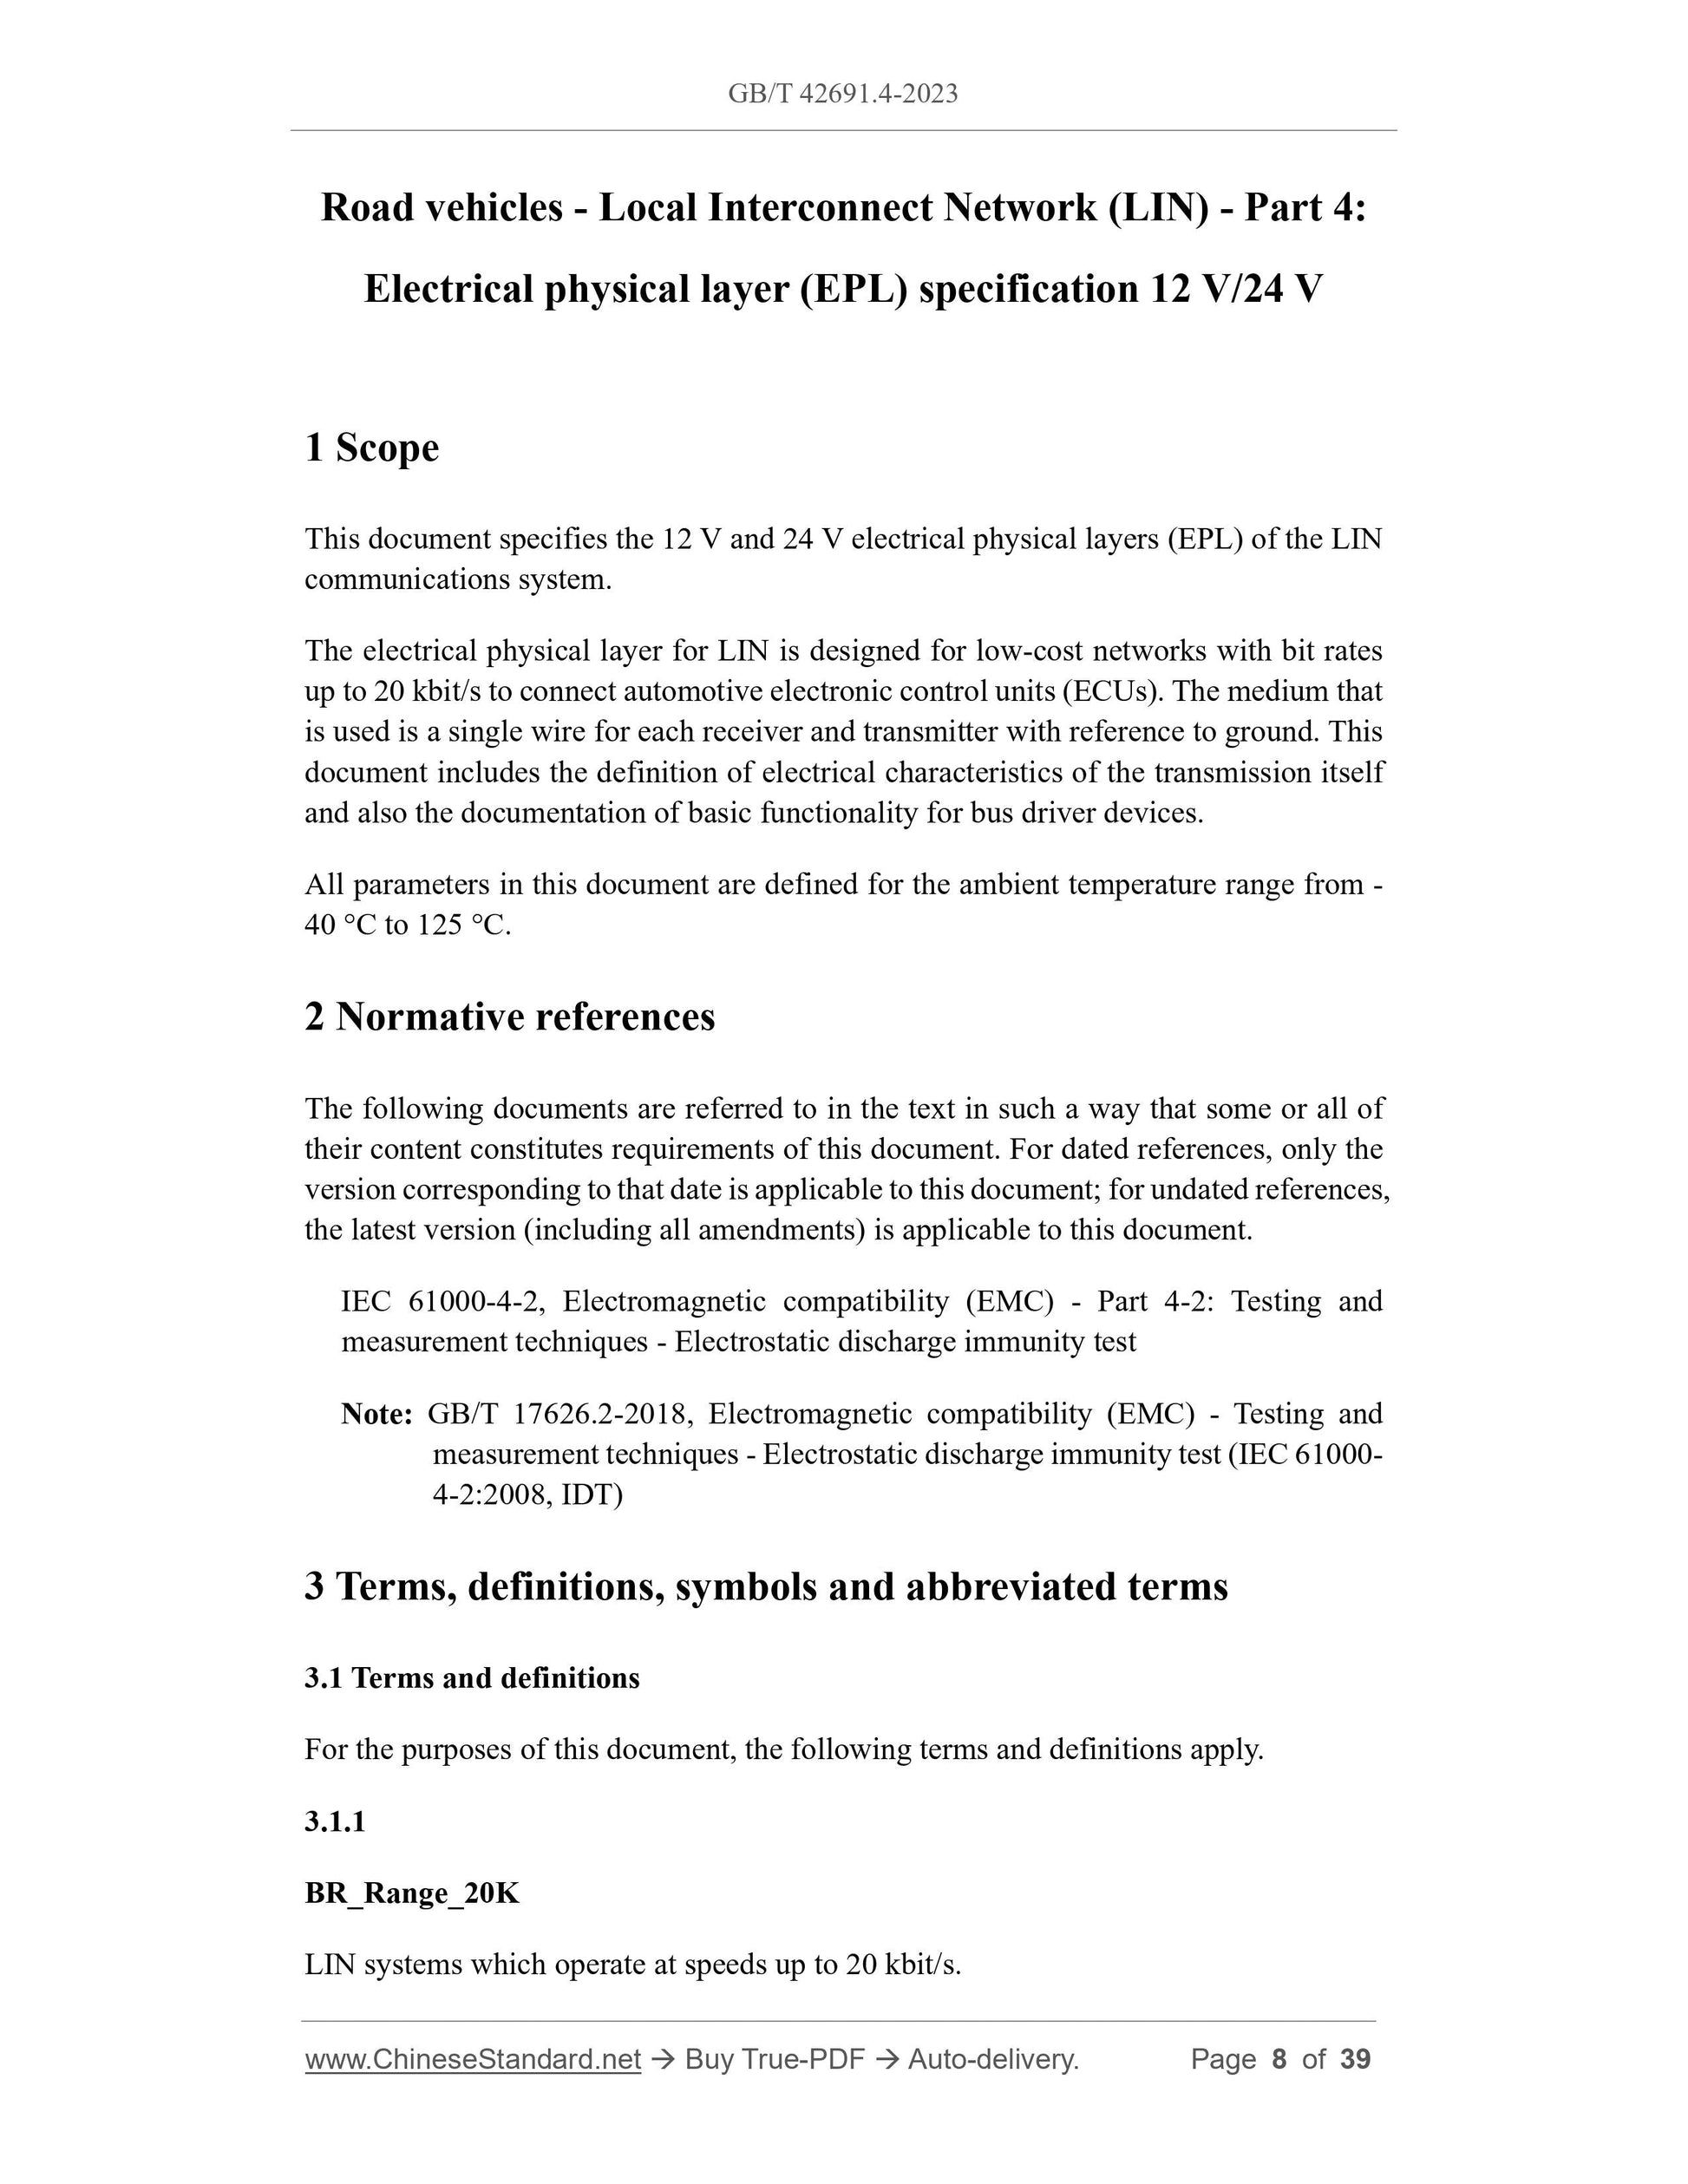 GB/T 42691.4-2023 Page 4